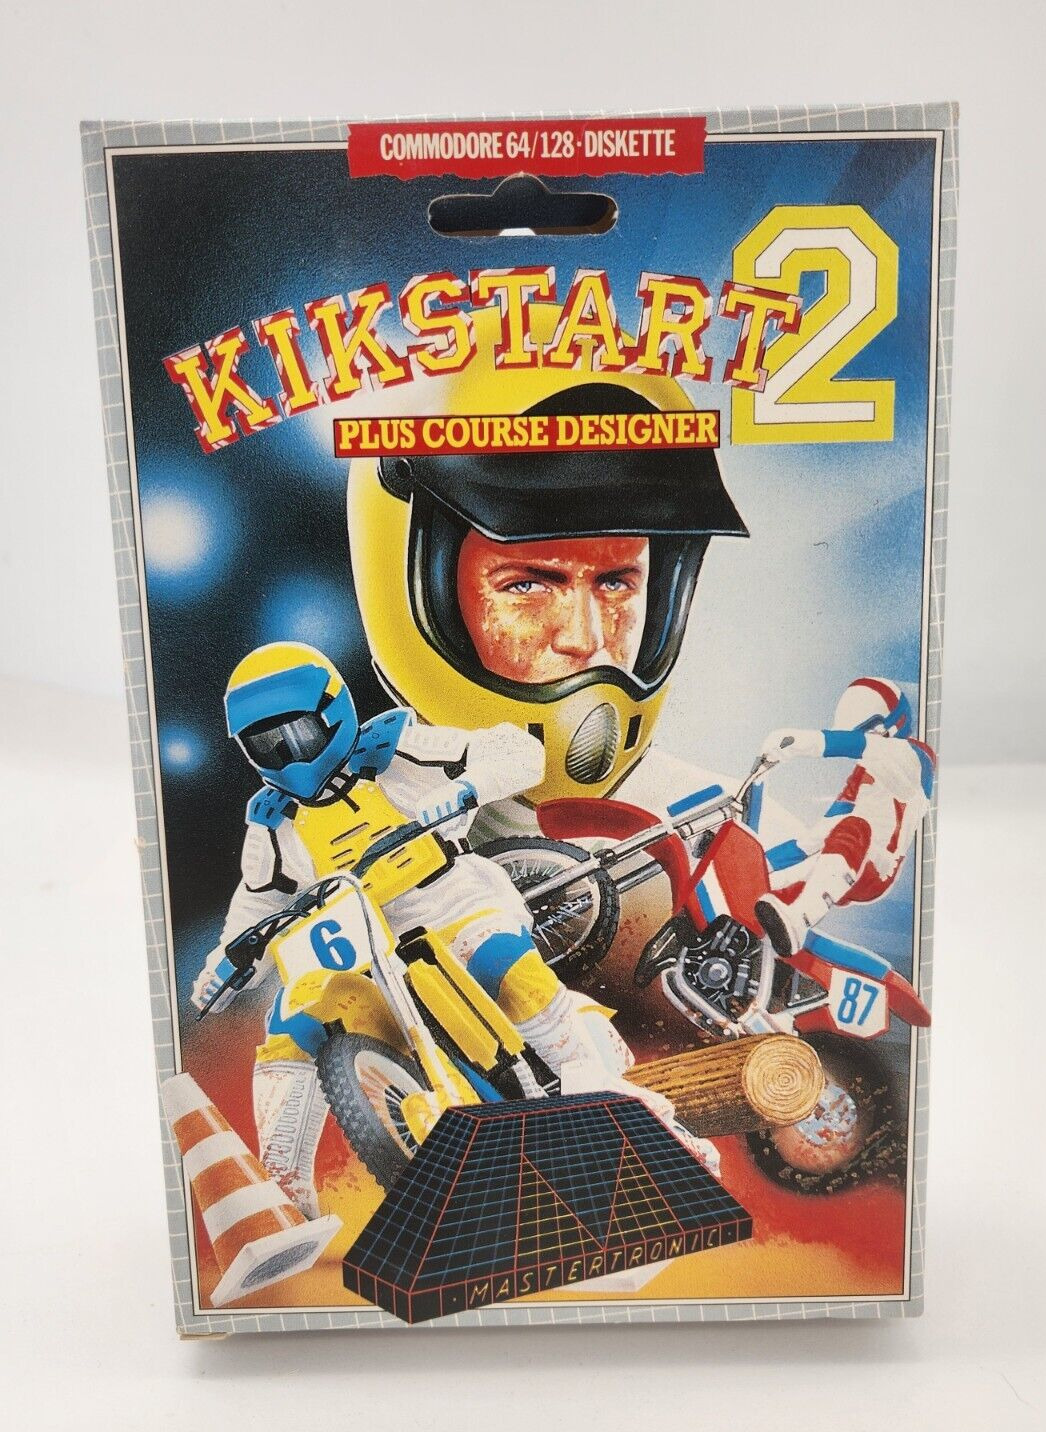 Kikstart 2 Plus Course Designer For Commodore 64 / 128 replacement BOX Only